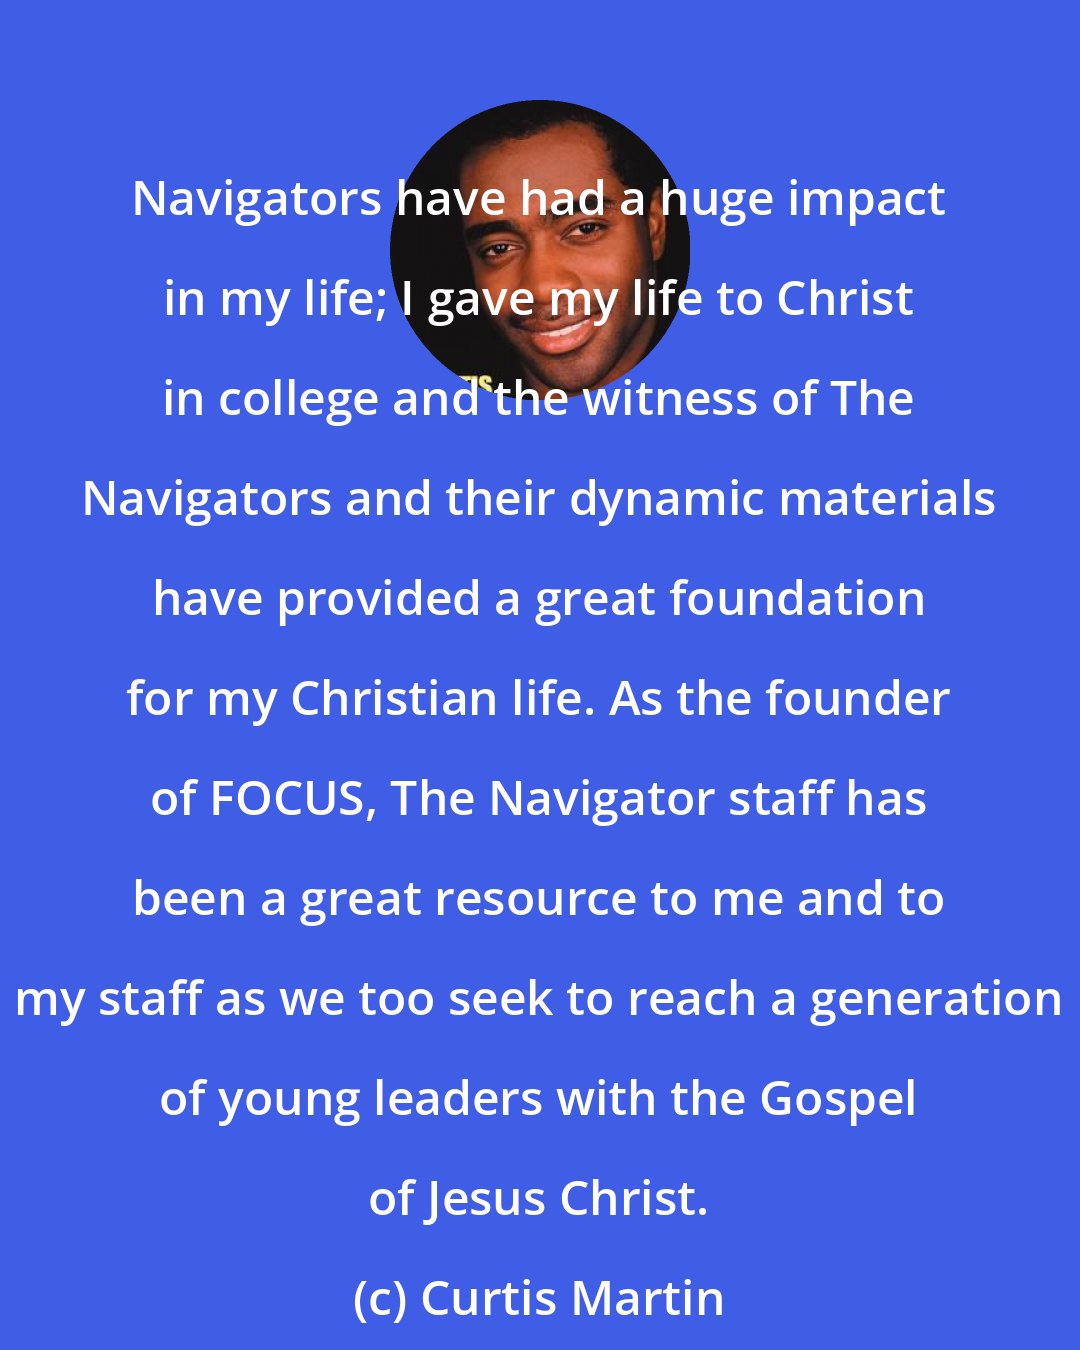 Curtis Martin: Navigators have had a huge impact in my life; I gave my life to Christ in college and the witness of The Navigators and their dynamic materials have provided a great foundation for my Christian life. As the founder of FOCUS, The Navigator staff has been a great resource to me and to my staff as we too seek to reach a generation of young leaders with the Gospel of Jesus Christ.